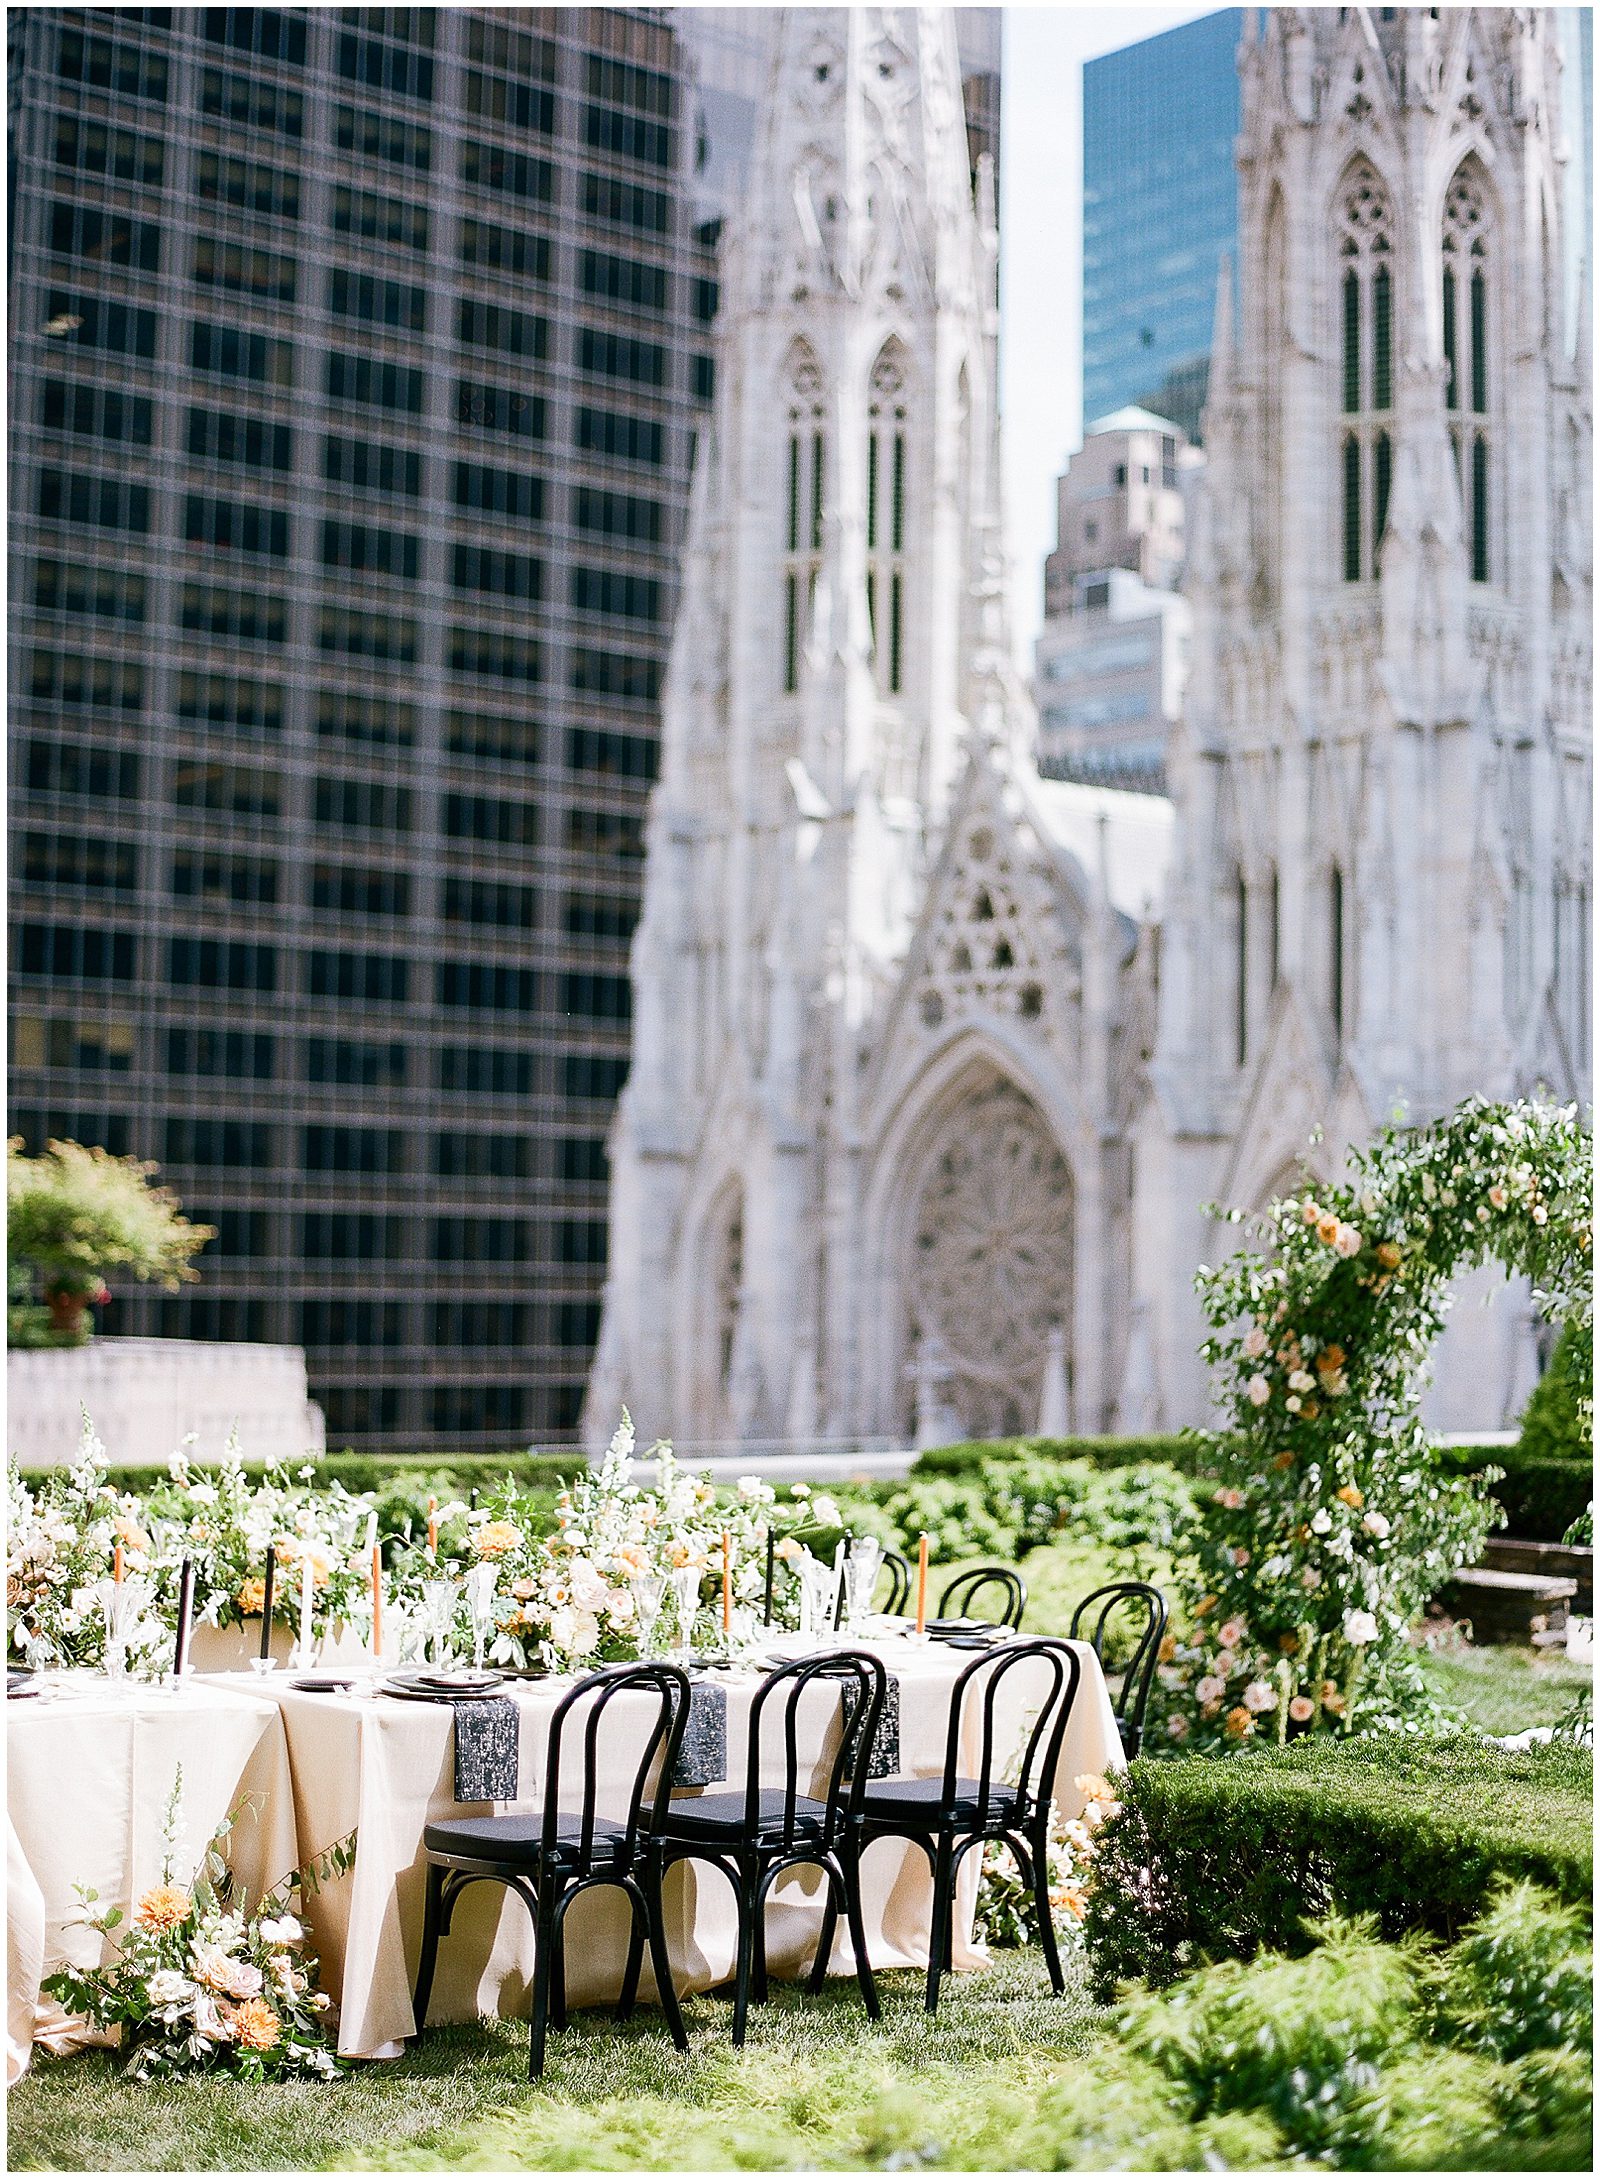 New York City Wedding Venue 620 Loft and Gardens Wedding Reception Table with St.Patricks Cathedral in Background Photo